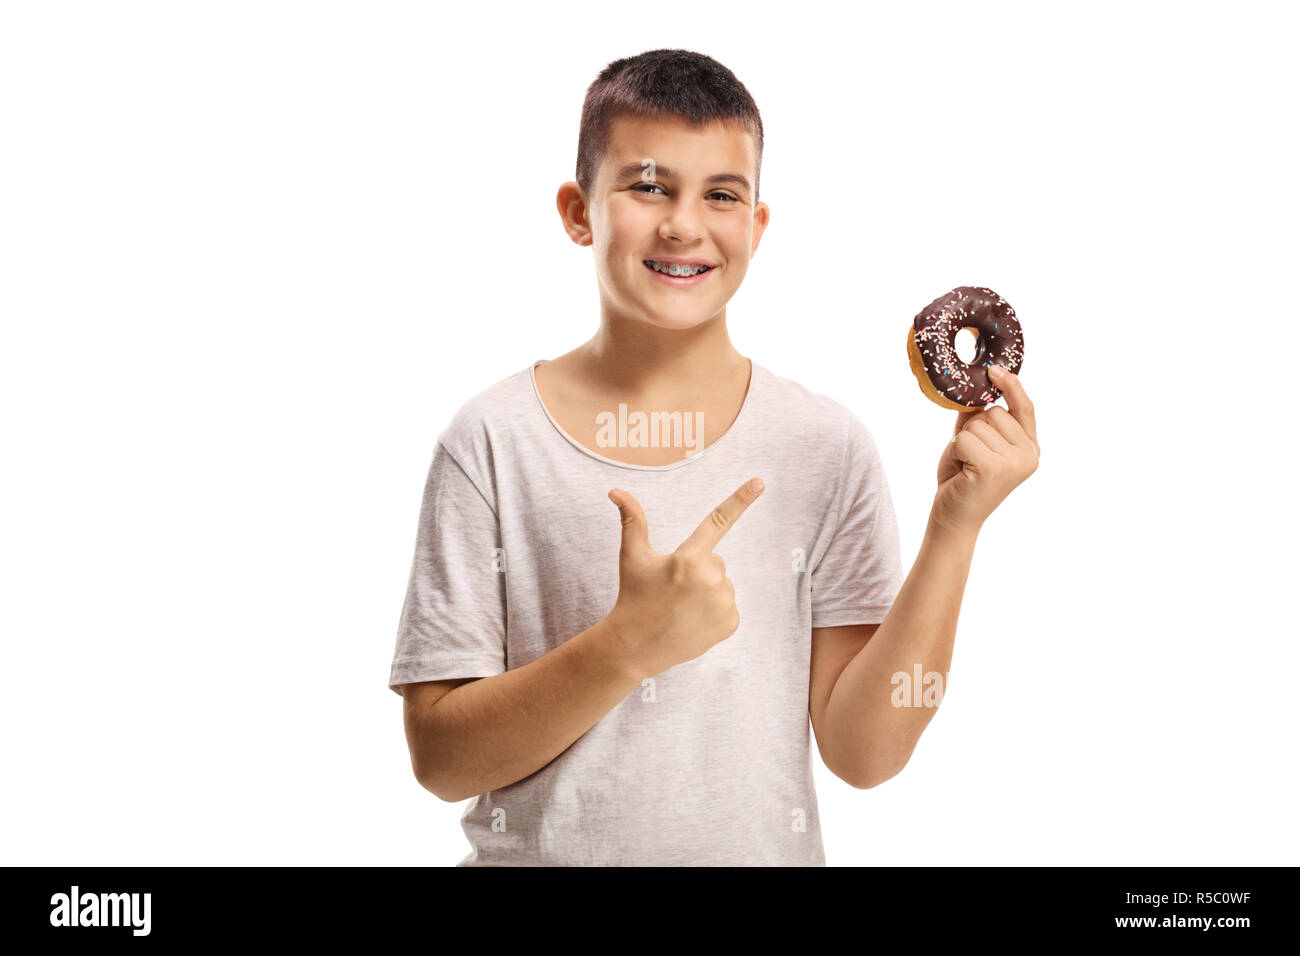 Smiling boy holding a chocolate donut and pointing isolated on white background Stock Photo